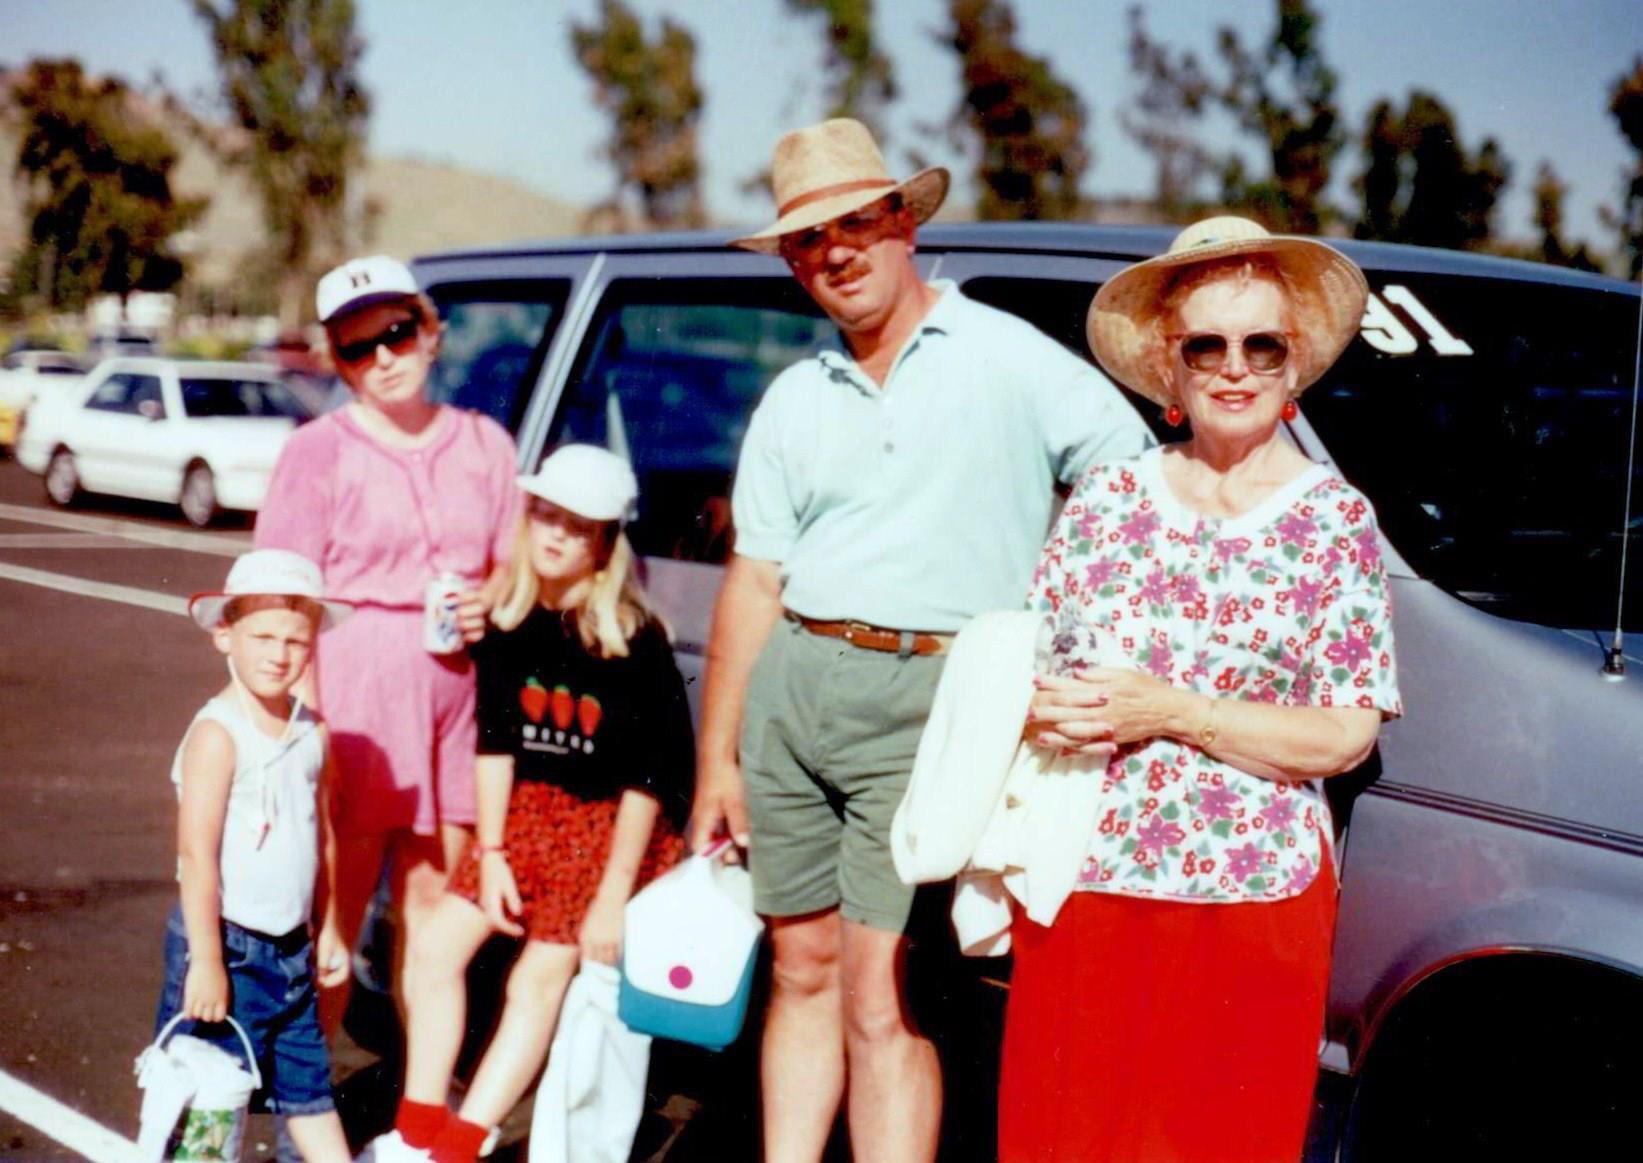 ask reddit 90s things - family vacation in the 90s